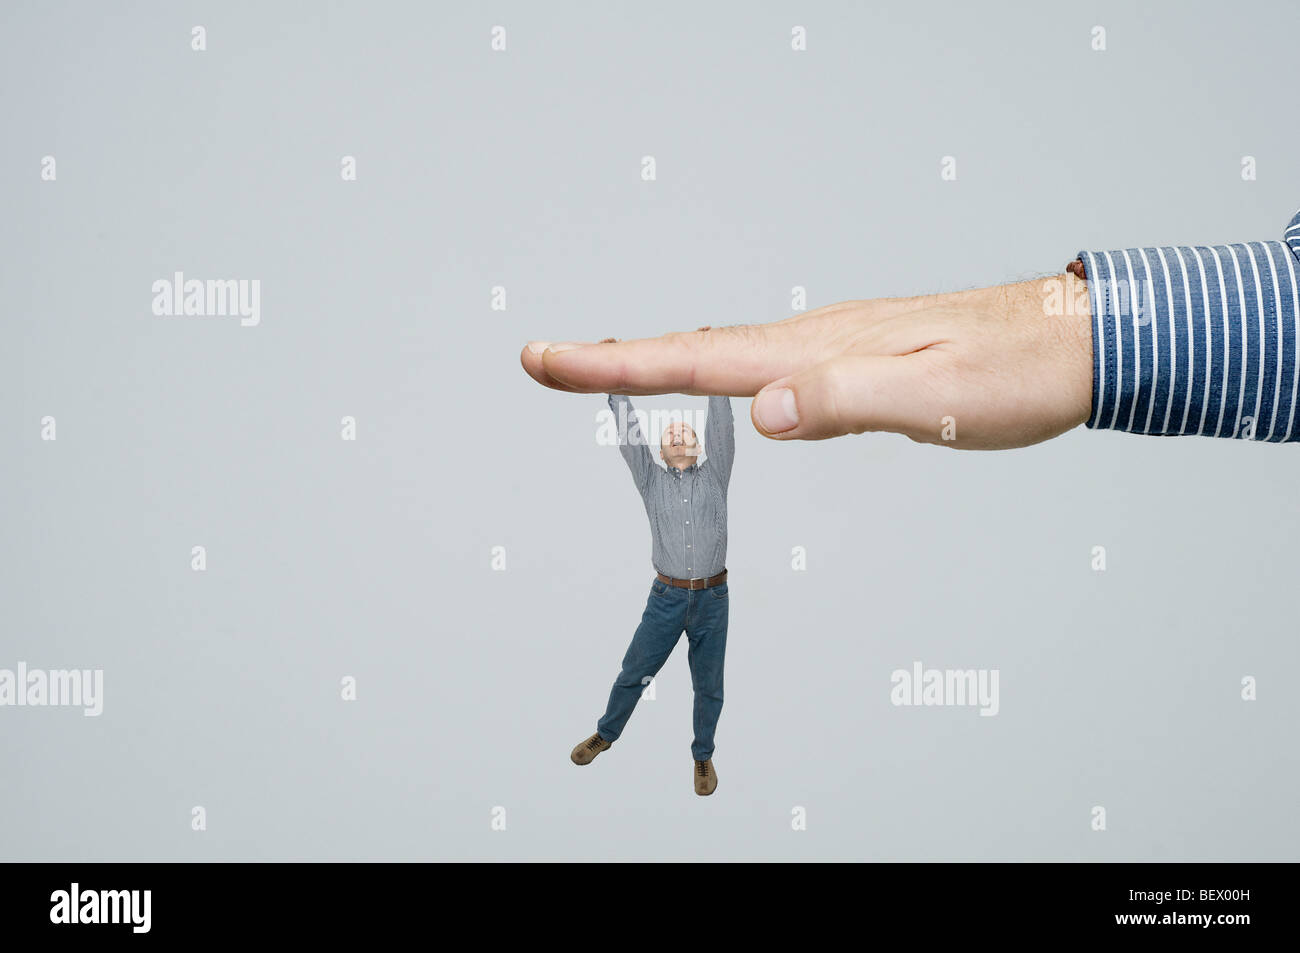 A man dangle from the hand Stock Photo